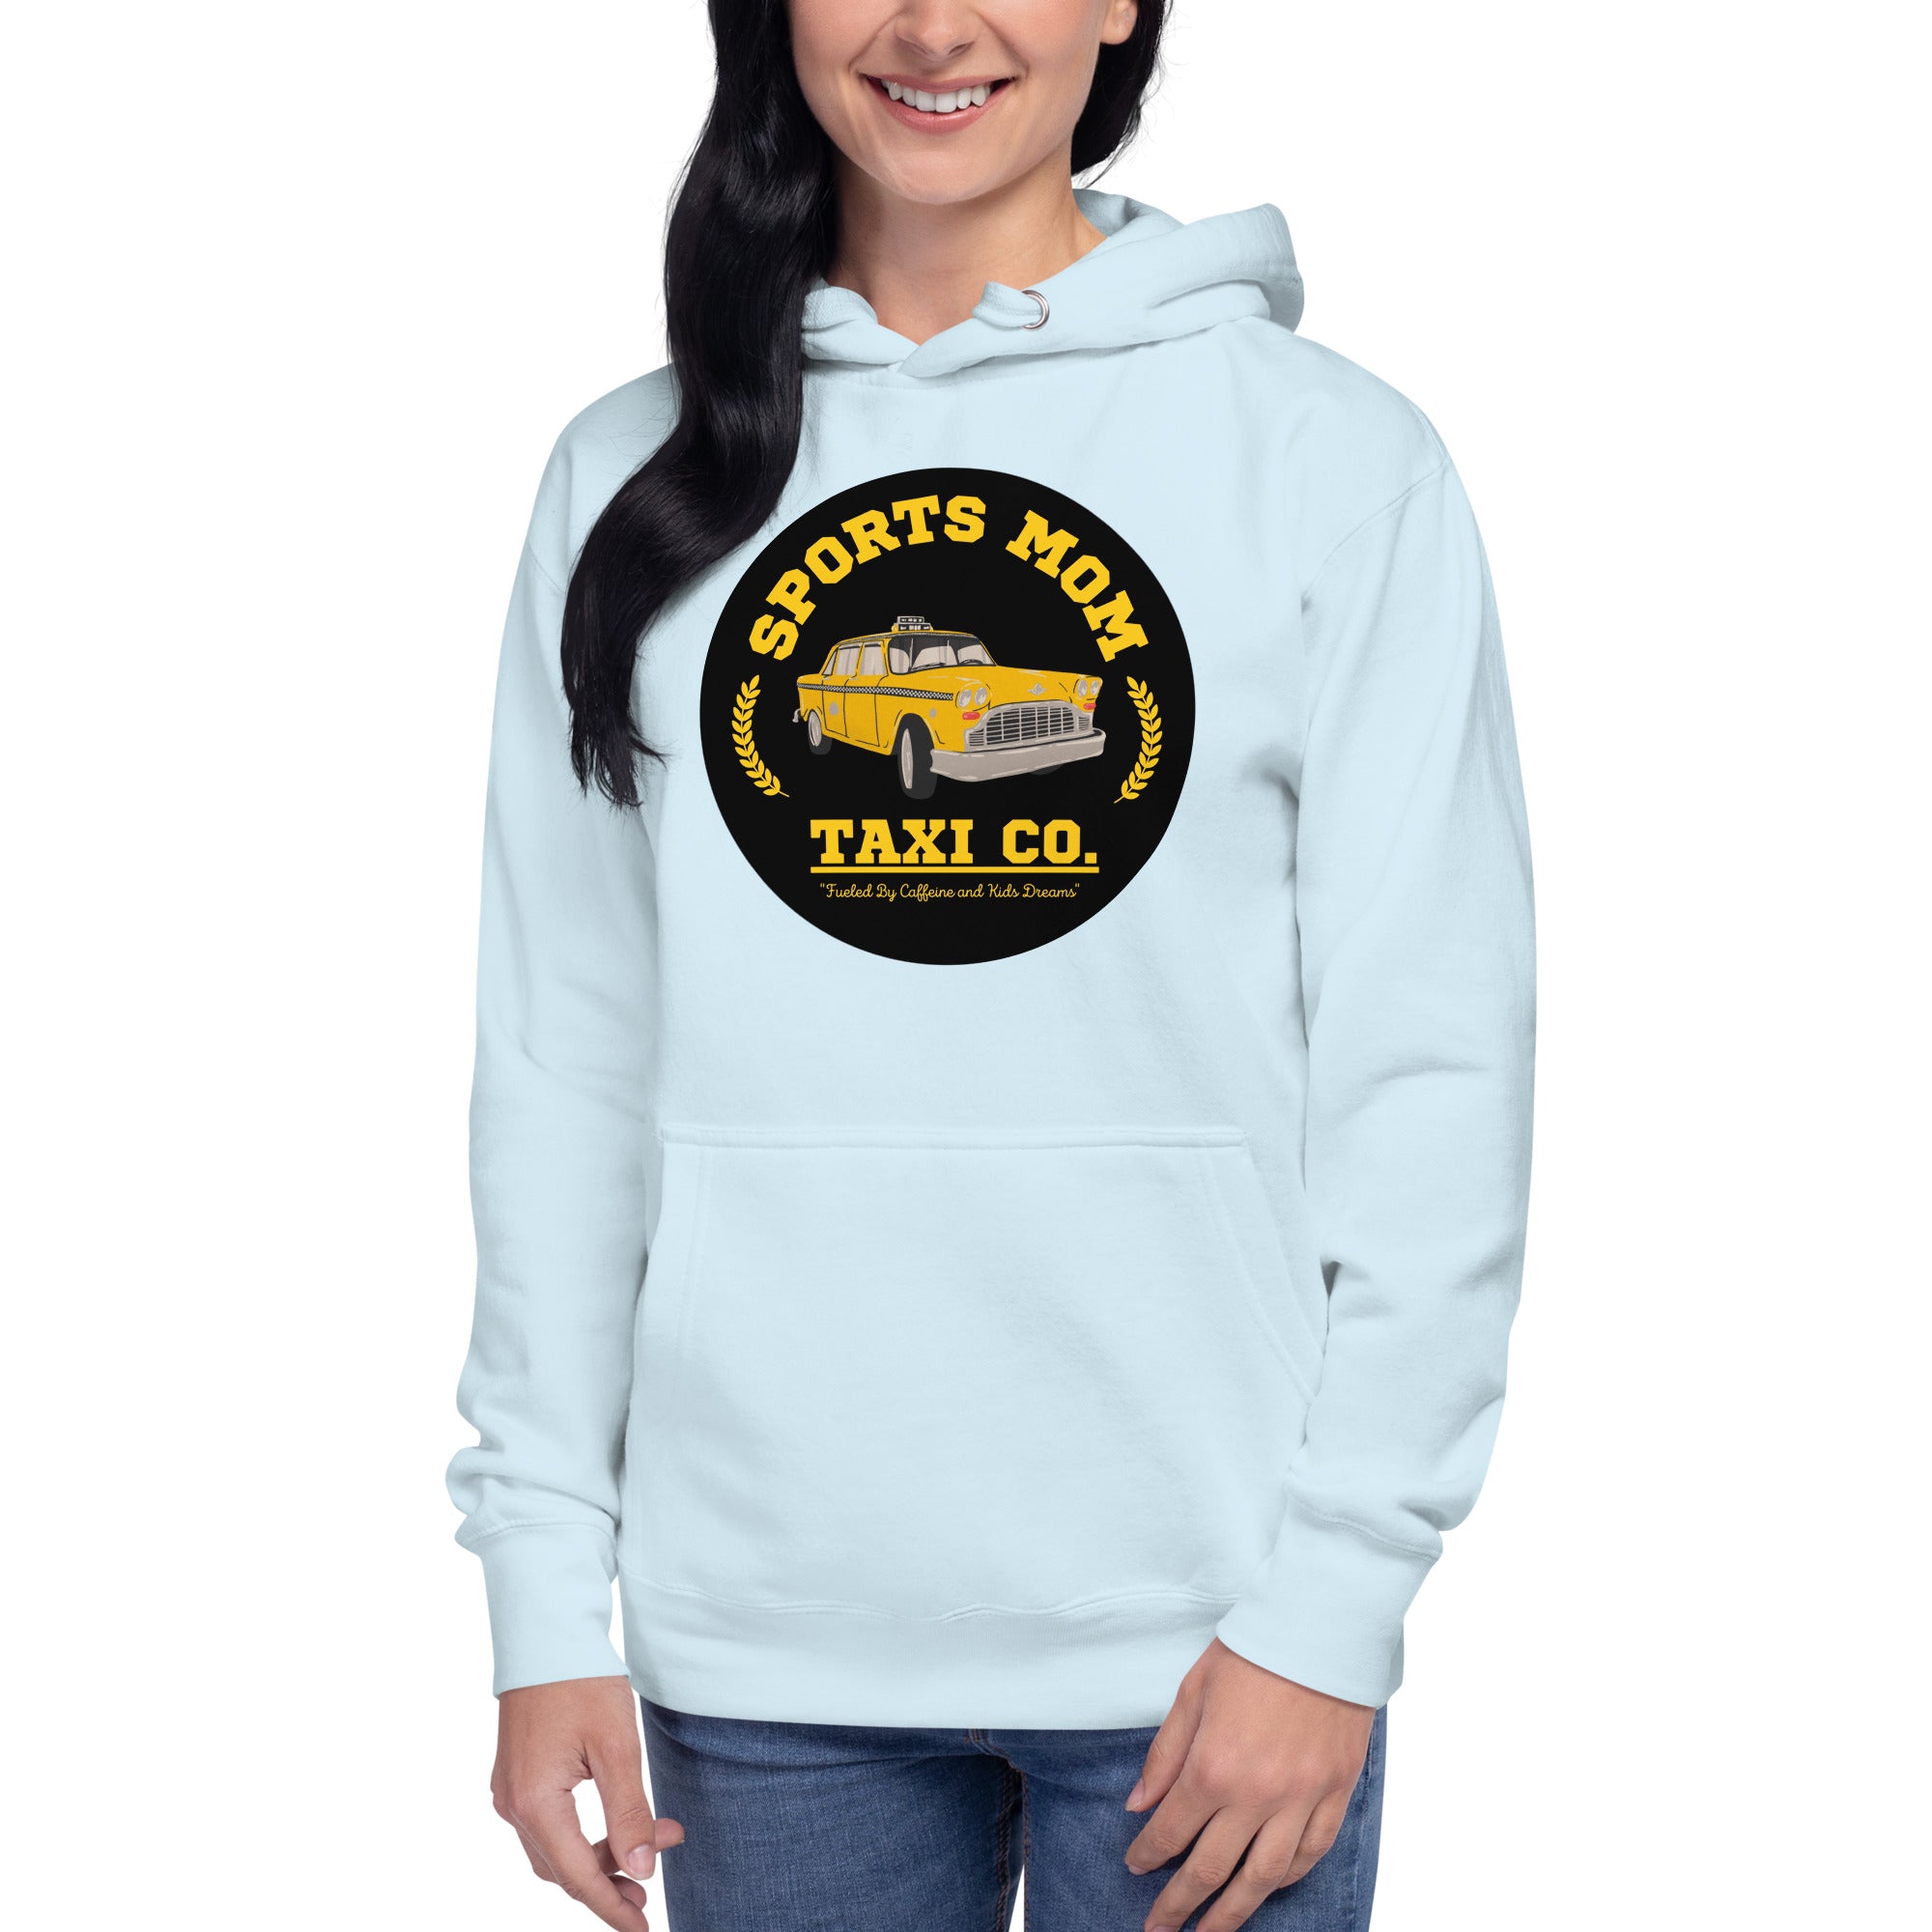 The Sports Mom Taxi Co. Original Heavy Hoodie